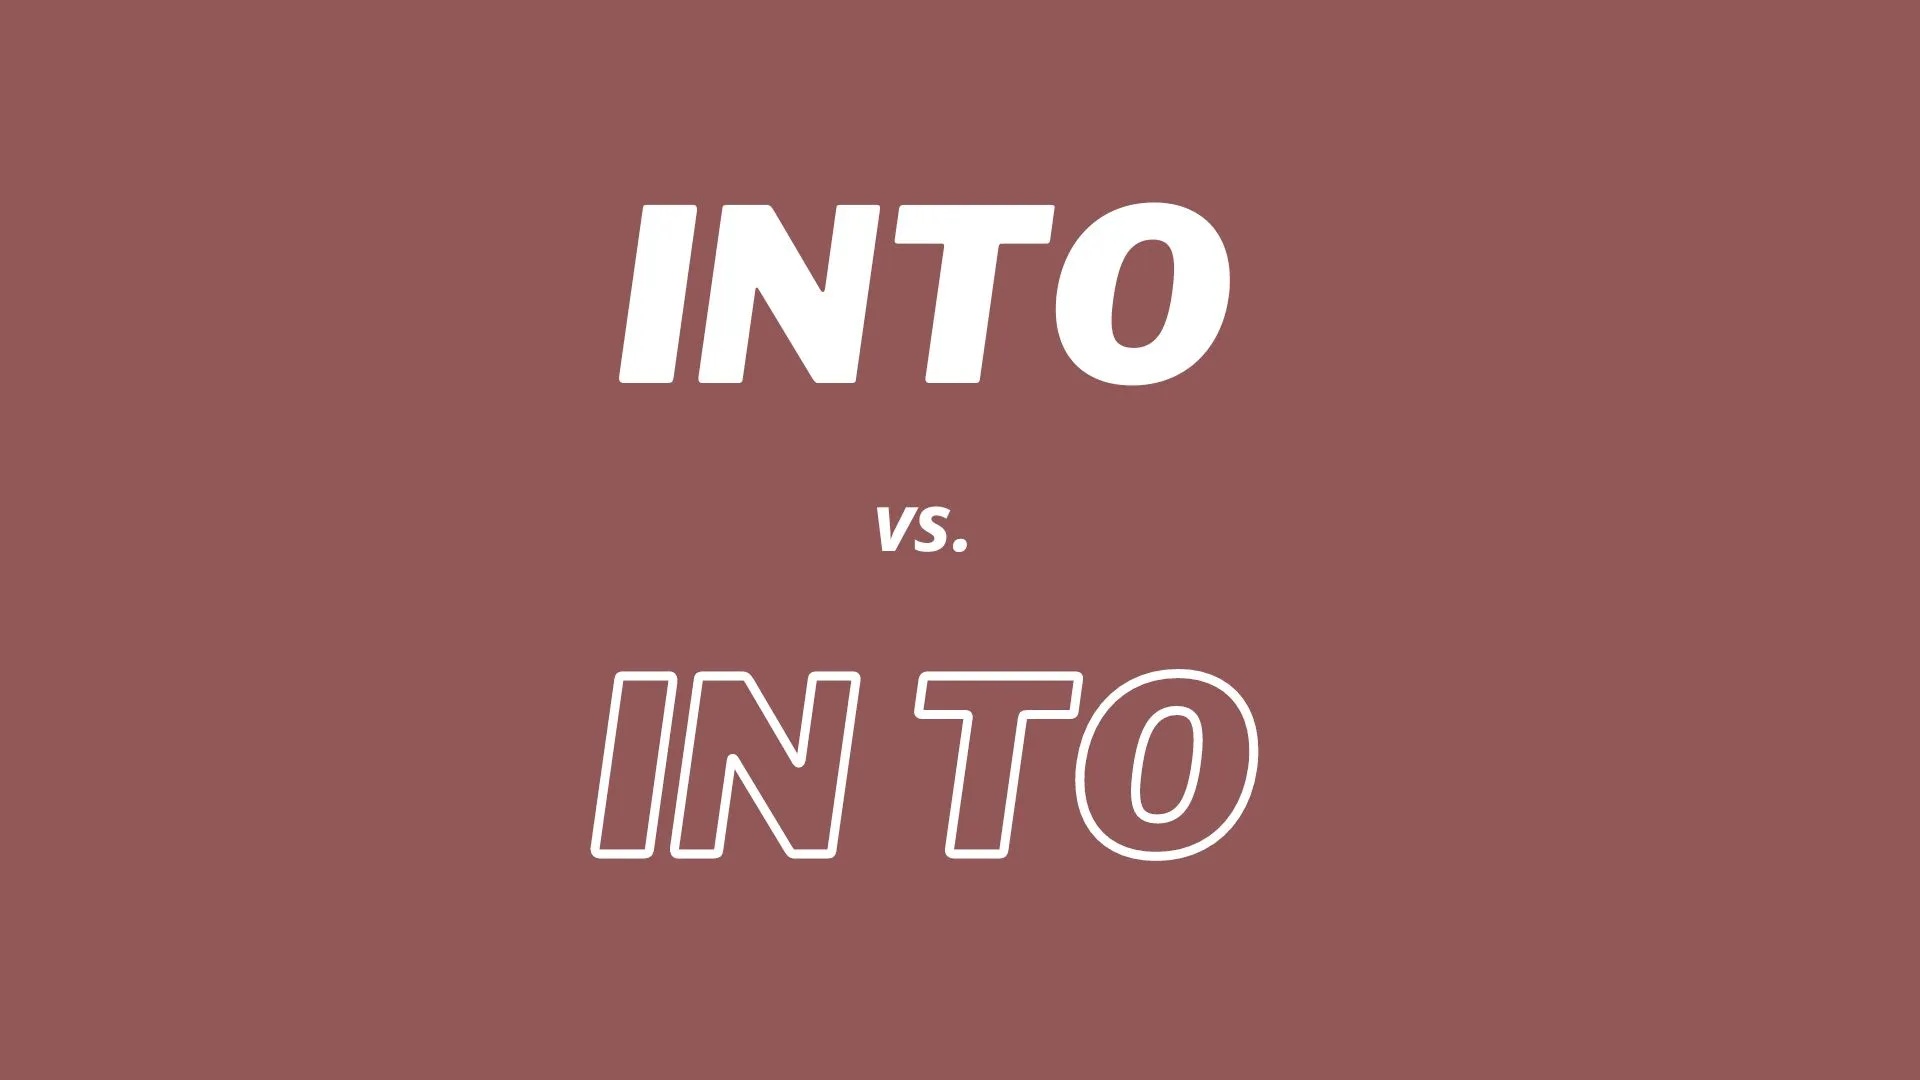 Visual comparison and definitions of vocabulary terms  "into" and  "in to "